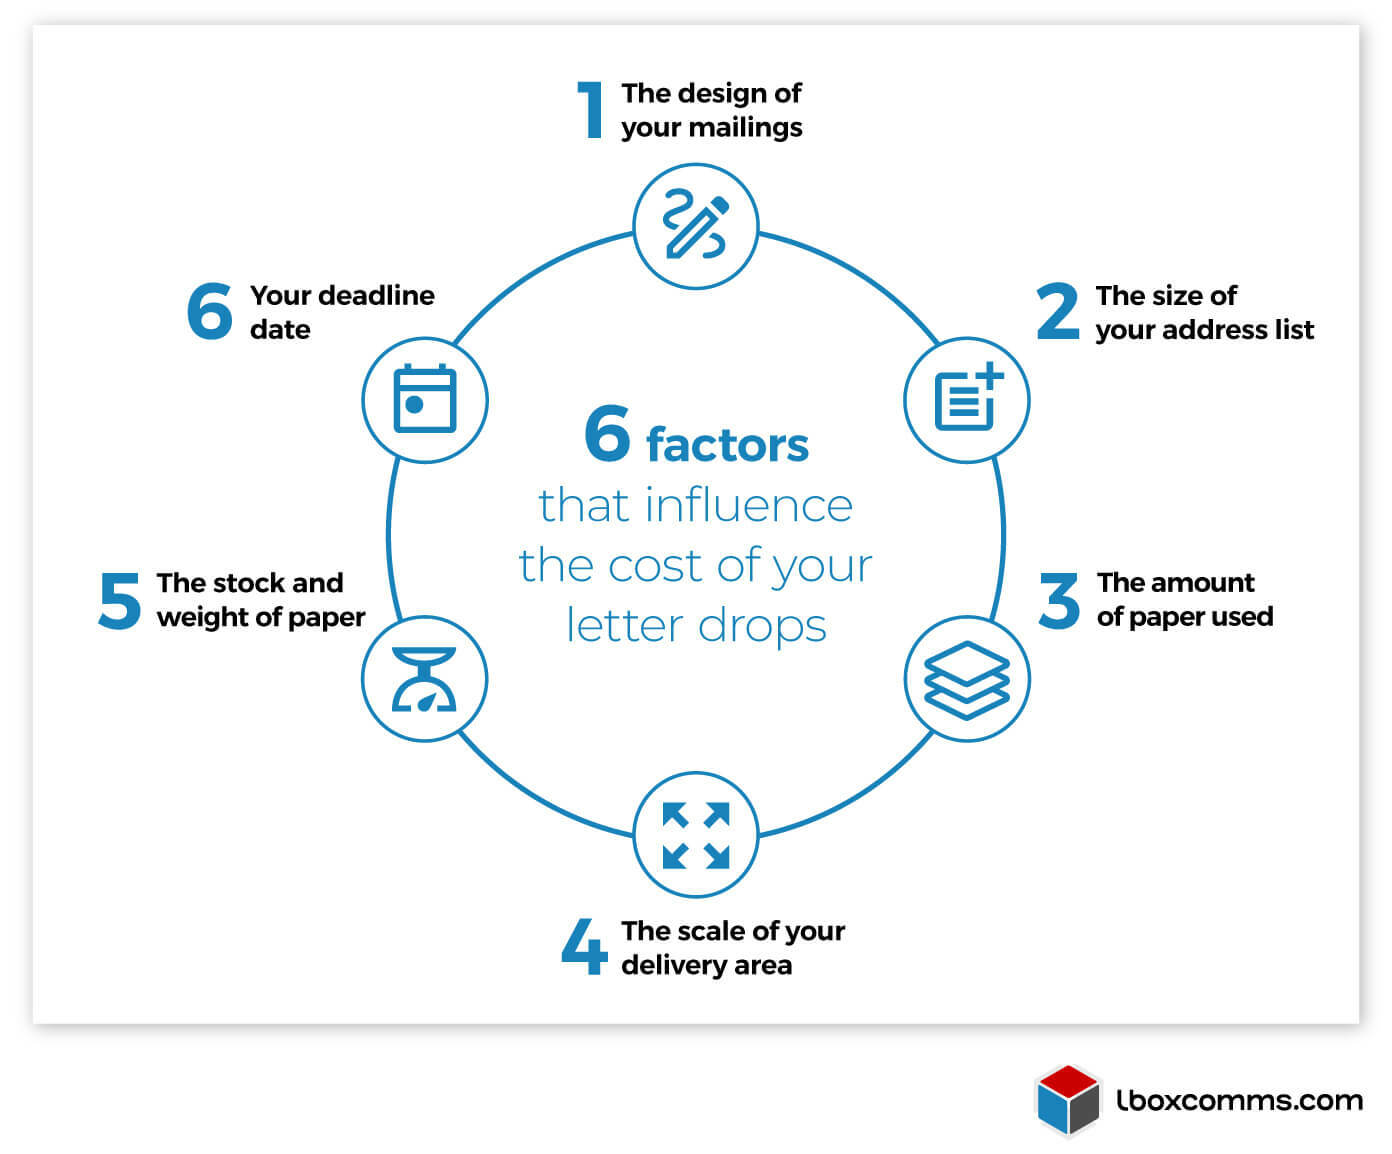 6 factors that influence the cost of letter drops from paper to number of recipients.